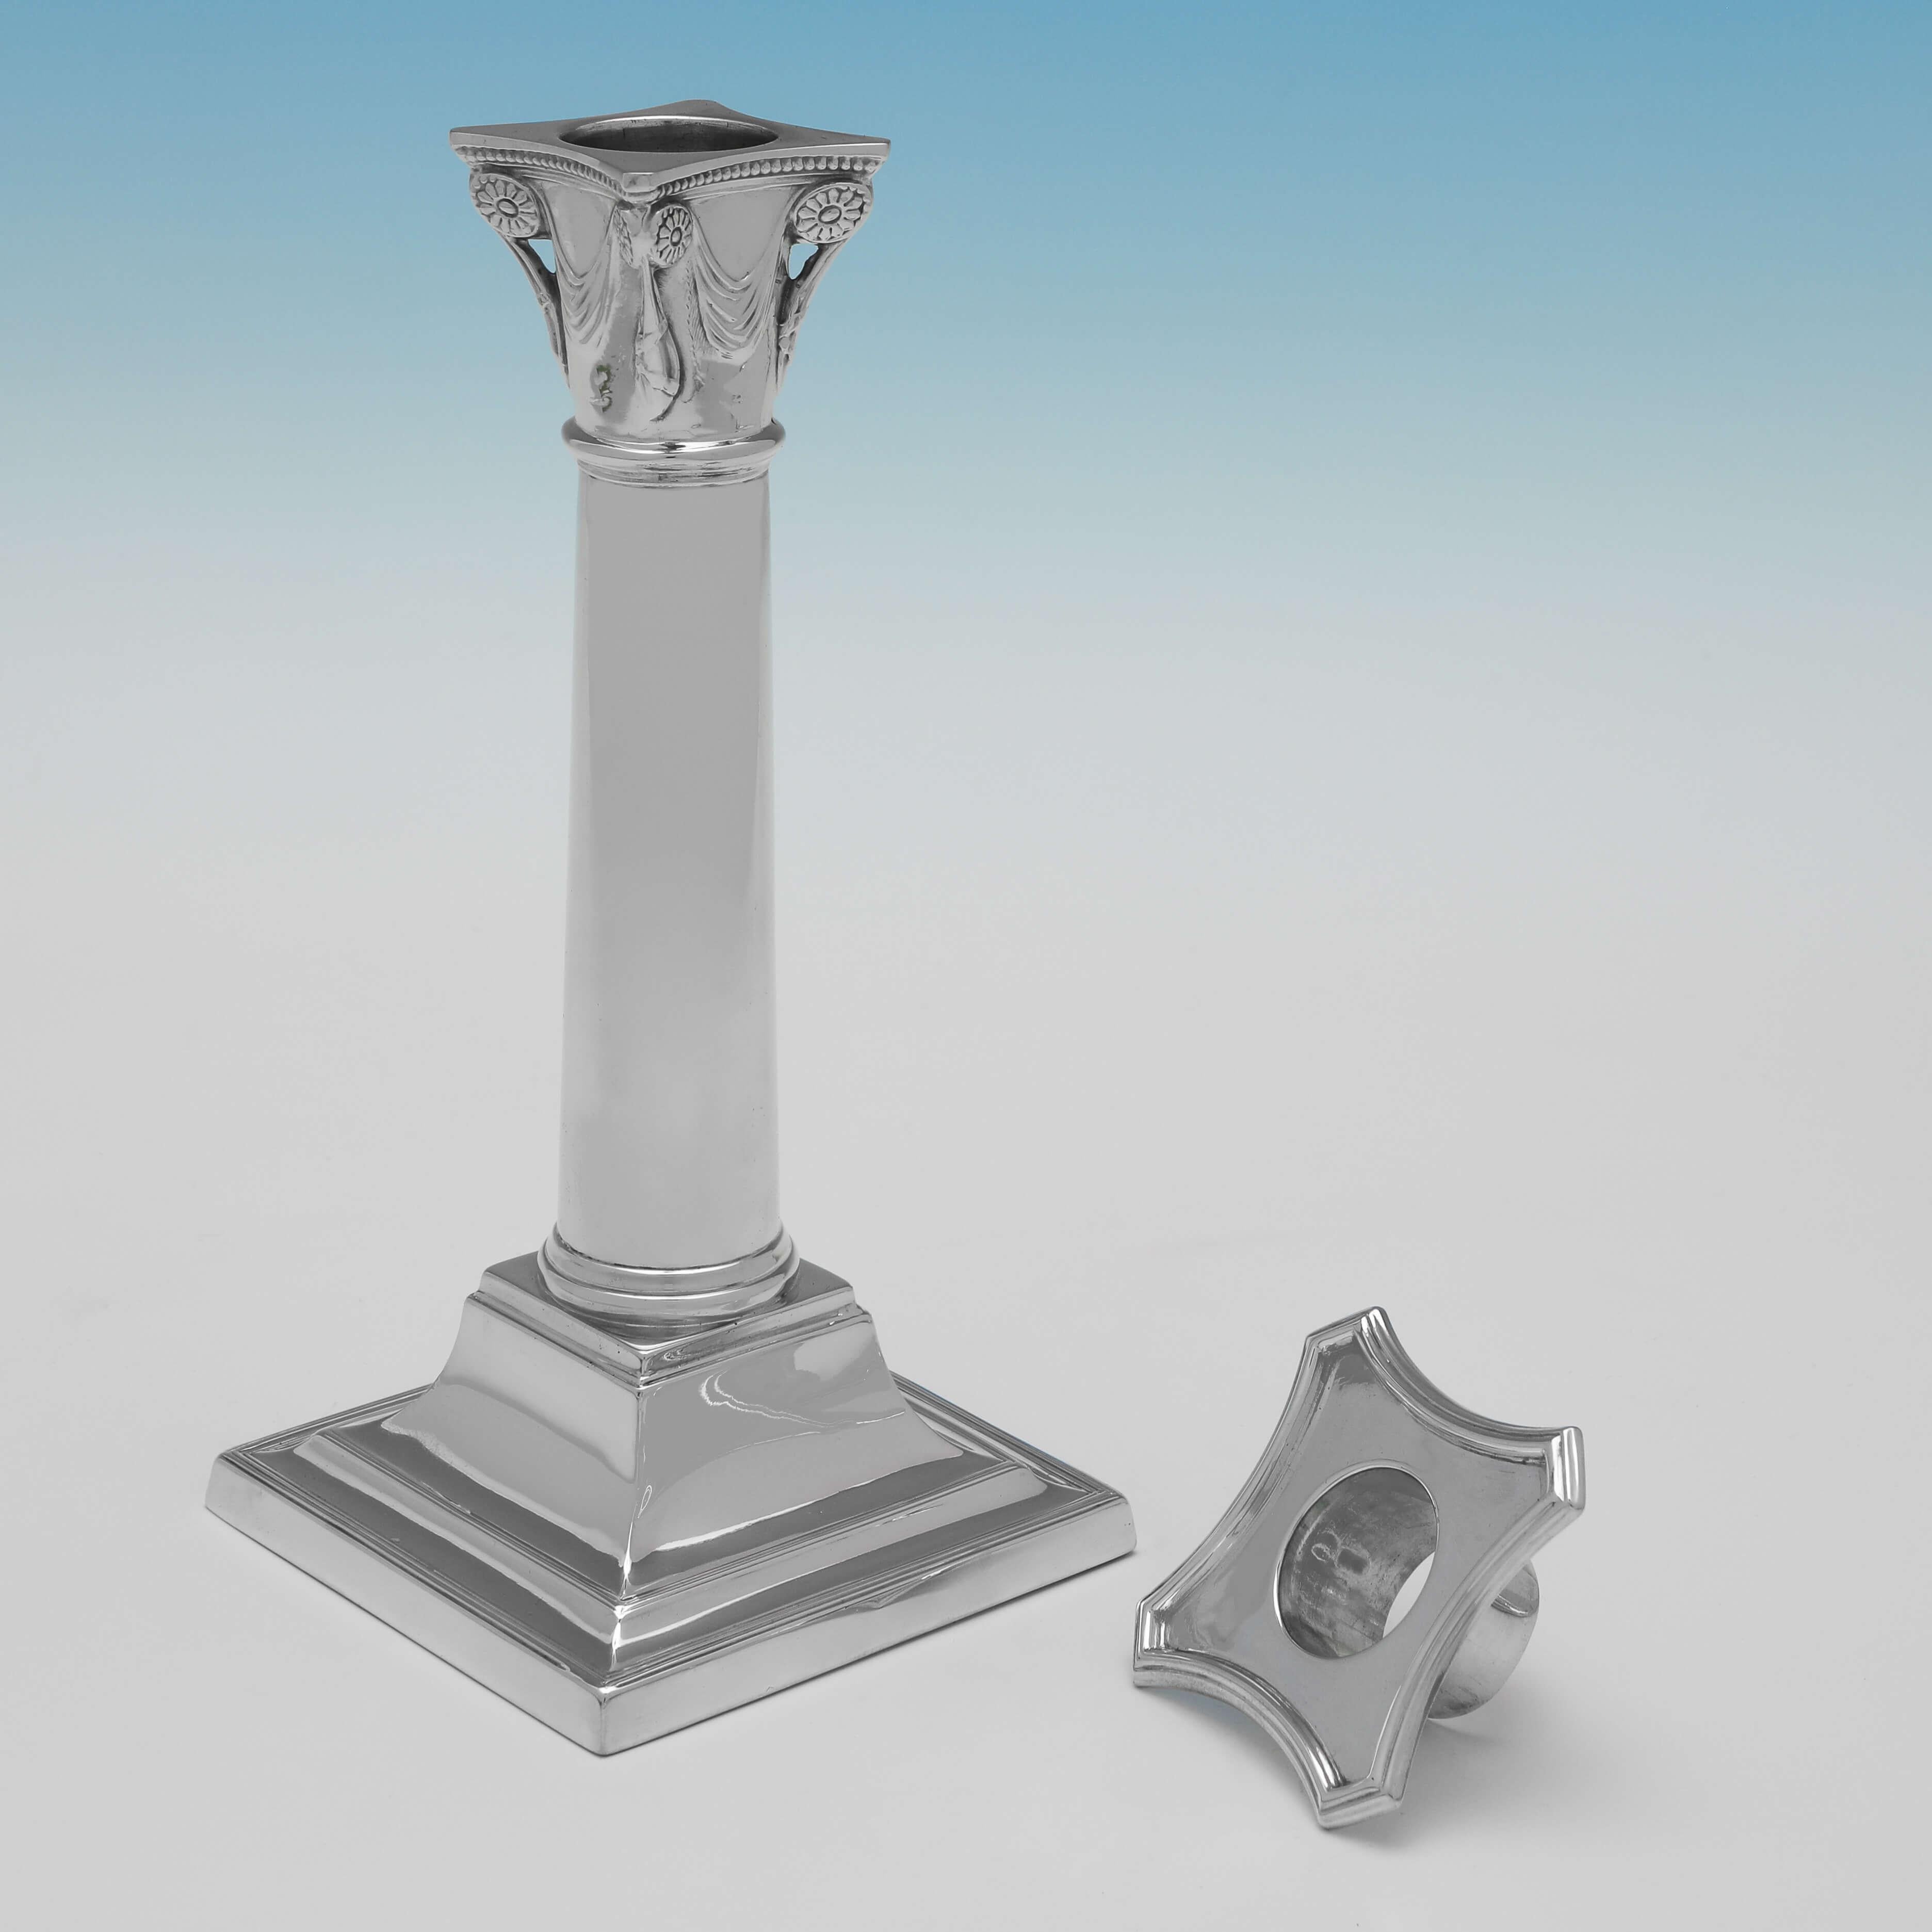 English Neoclassical Revival Sterling Silver Pair of Candlesticks, Sheffield 1921